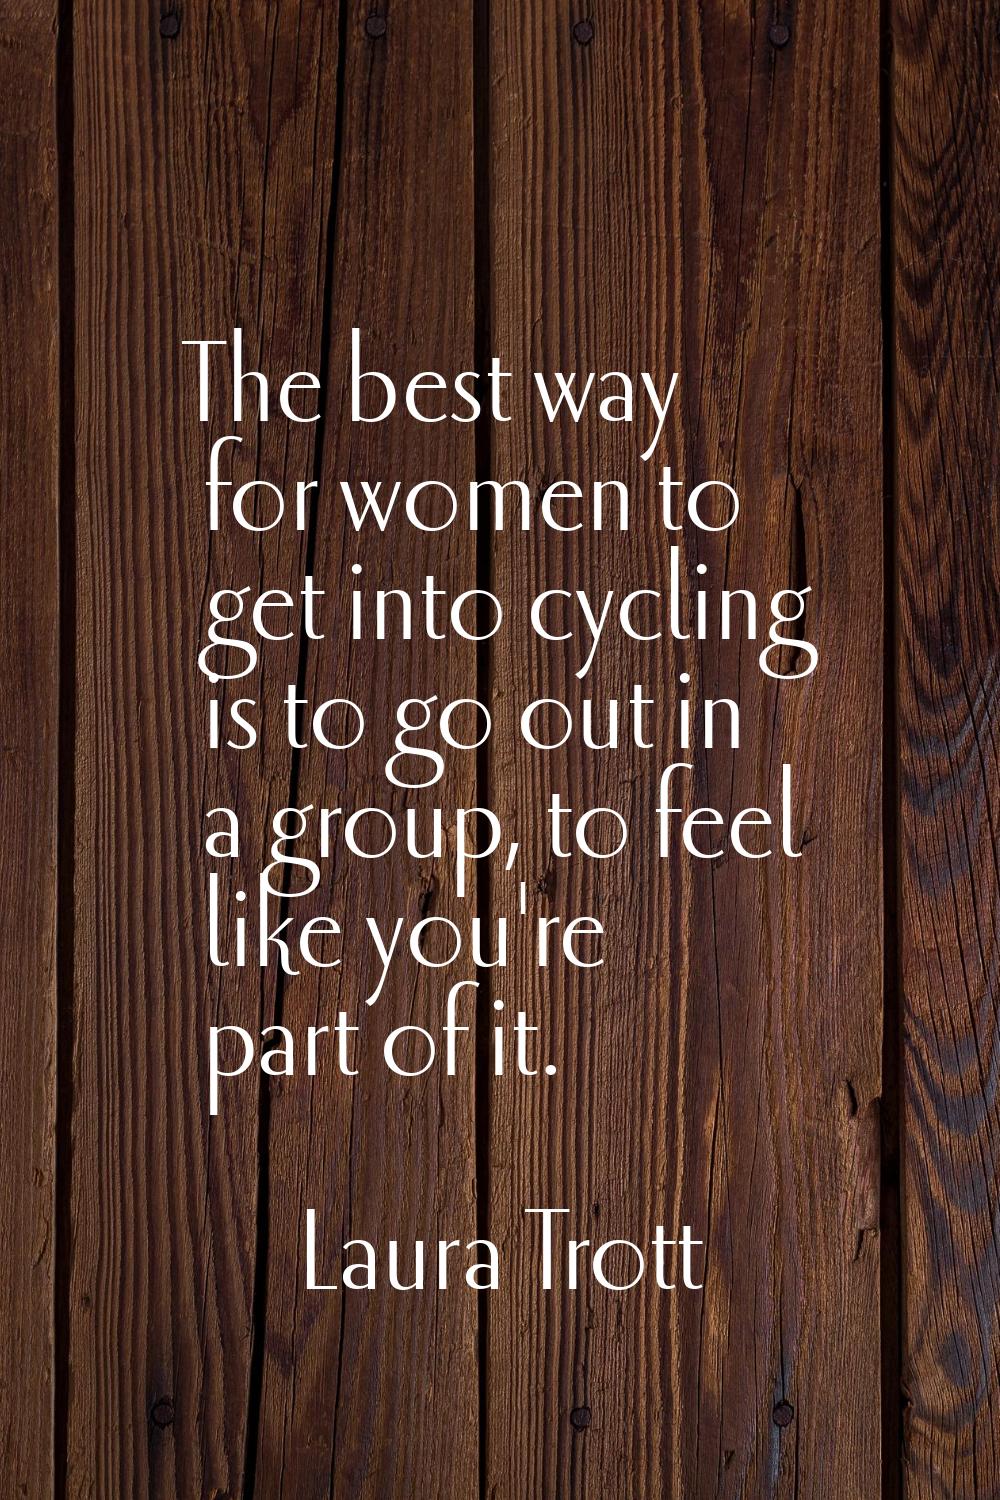 The best way for women to get into cycling is to go out in a group, to feel like you're part of it.